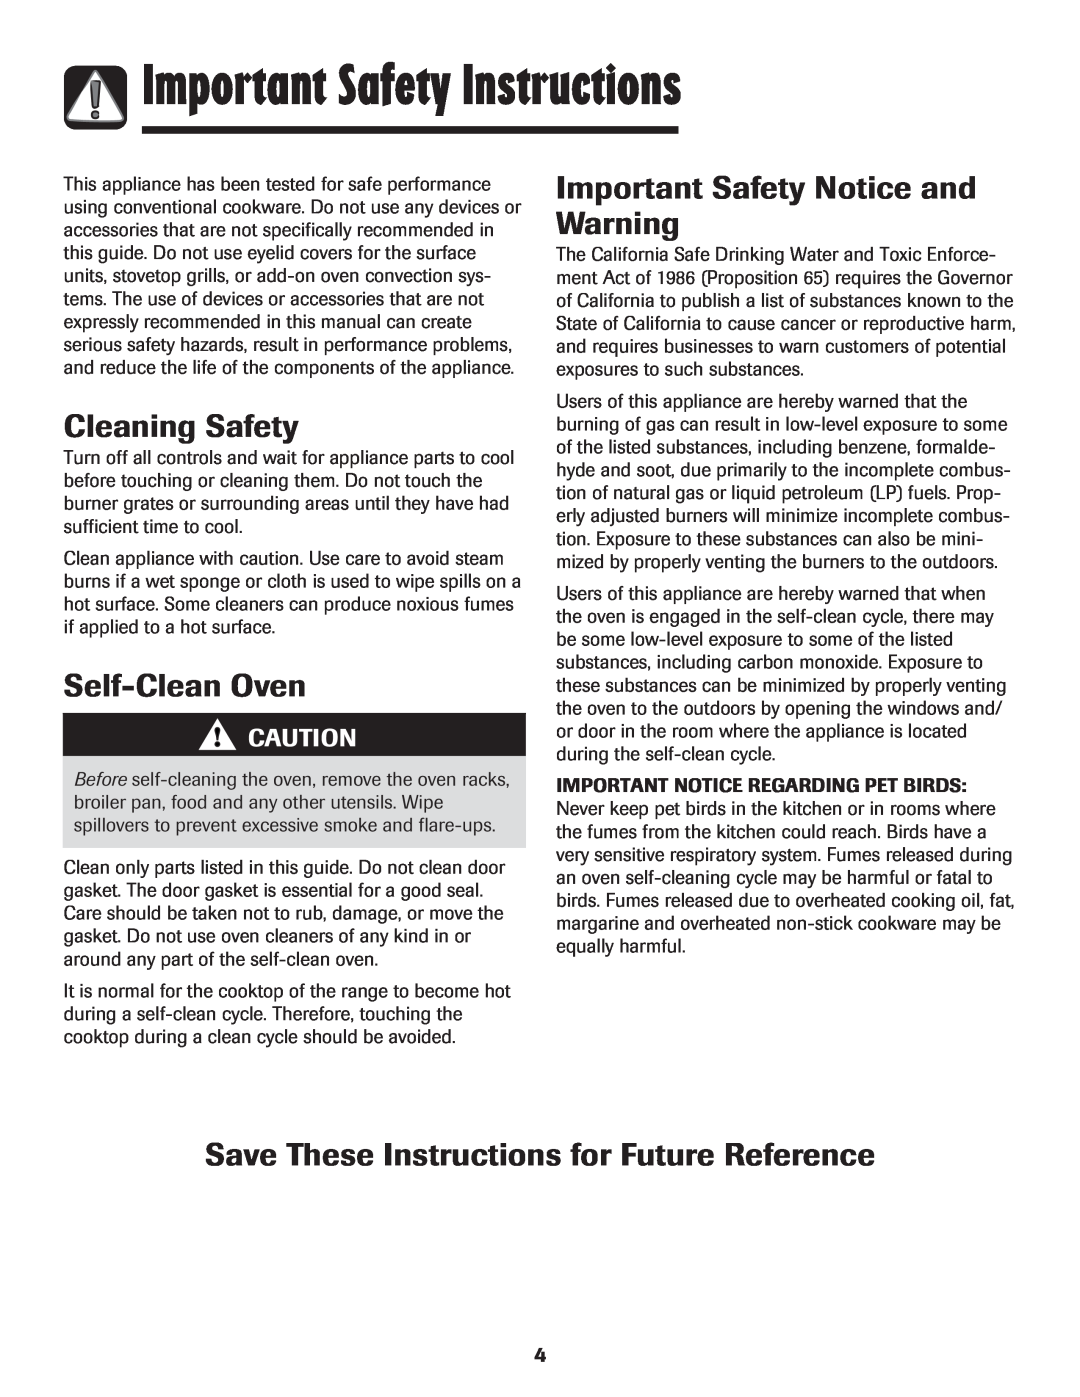 Amana AGR5835QDW Cleaning Safety, Self-Clean Oven, Important Safety Notice and Warning, Important Safety Instructions 